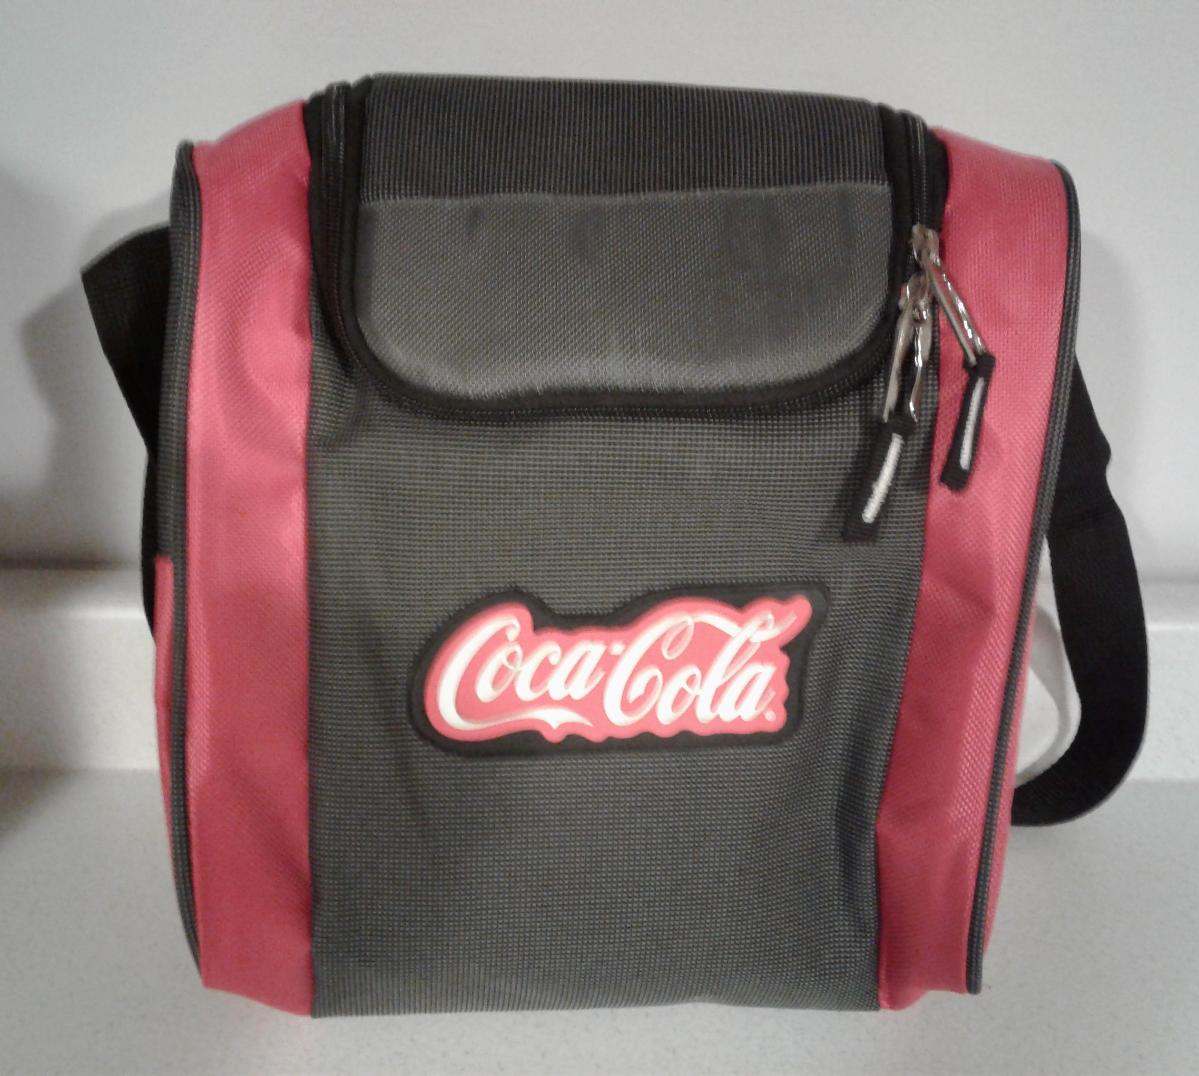 COCA COLA INSULATED LUNCH BAG COOLER TOTE